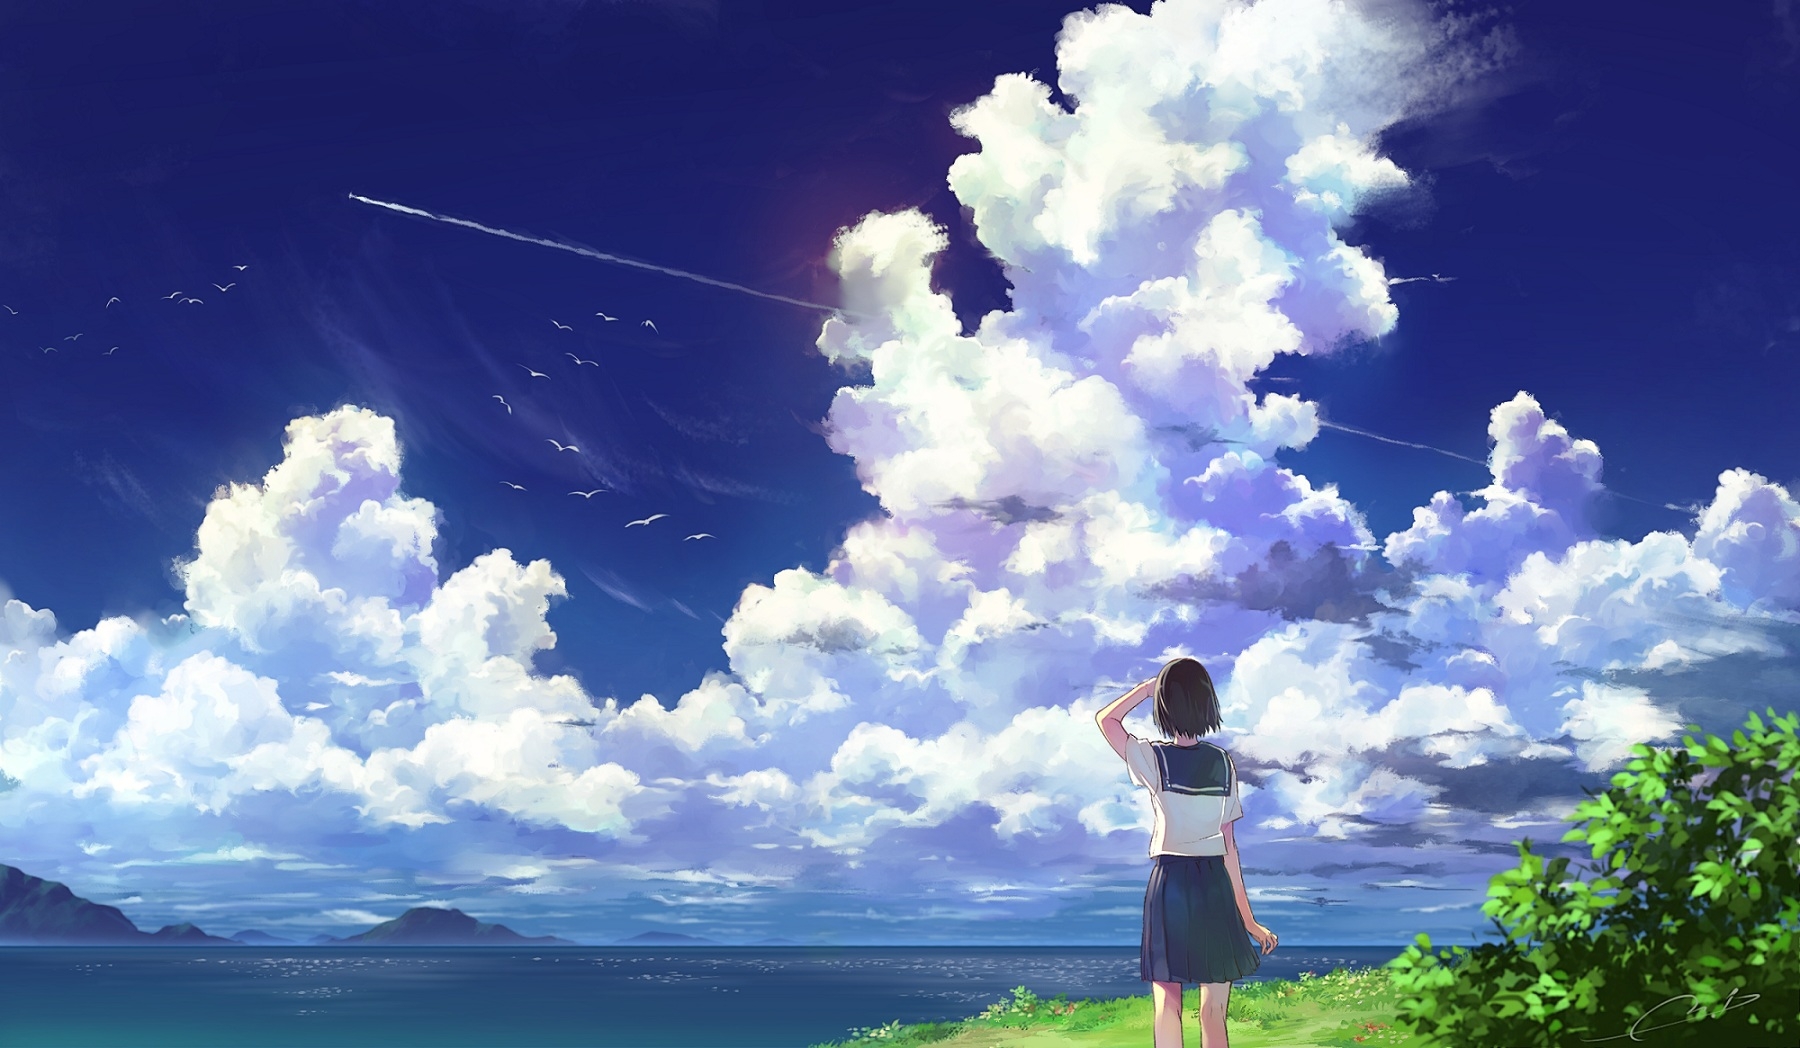 Download 320x480 Anime School Girl, Anime Landscape, Clouds, Scenic, Summer Wallpaper for iPhone 3GS